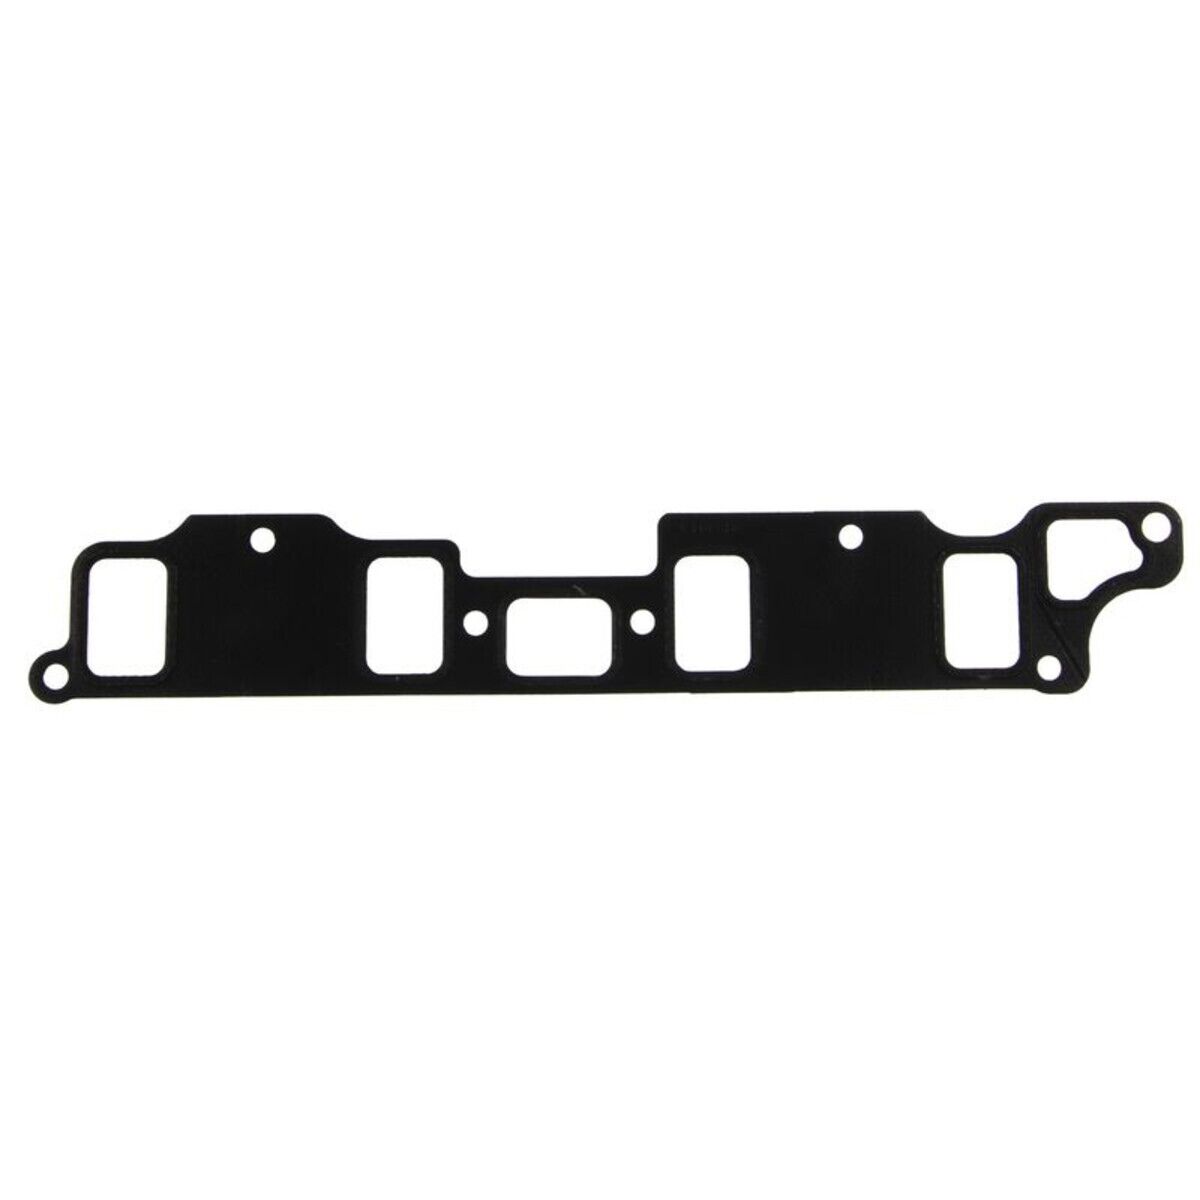 MS15304 Mahle Intake Manifold Gasket for Chevy Olds Somerset Citation S10 Pickup